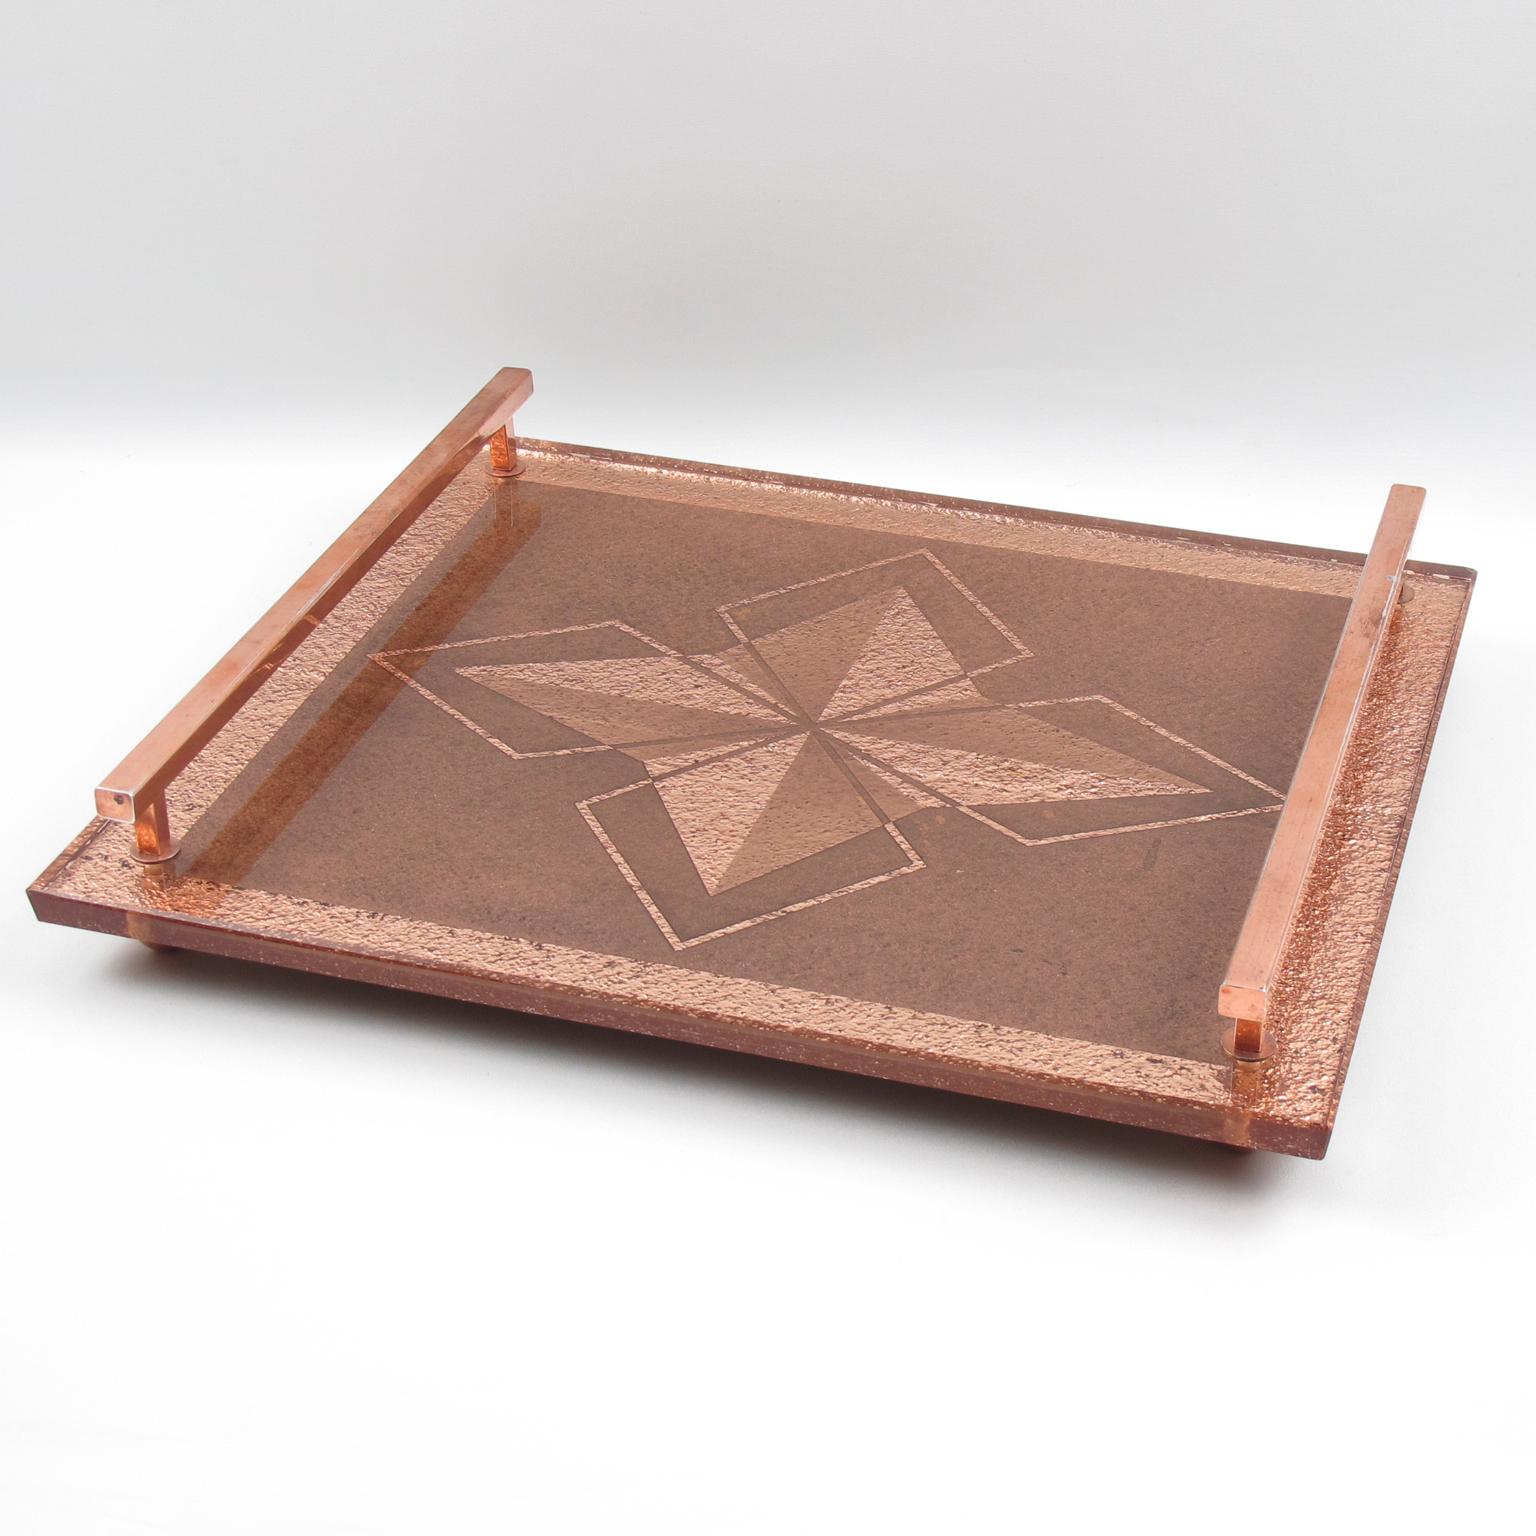 French Atelier Pansart Style Art Deco Copper Mirrored Glass Serving Tray, France 1940s For Sale